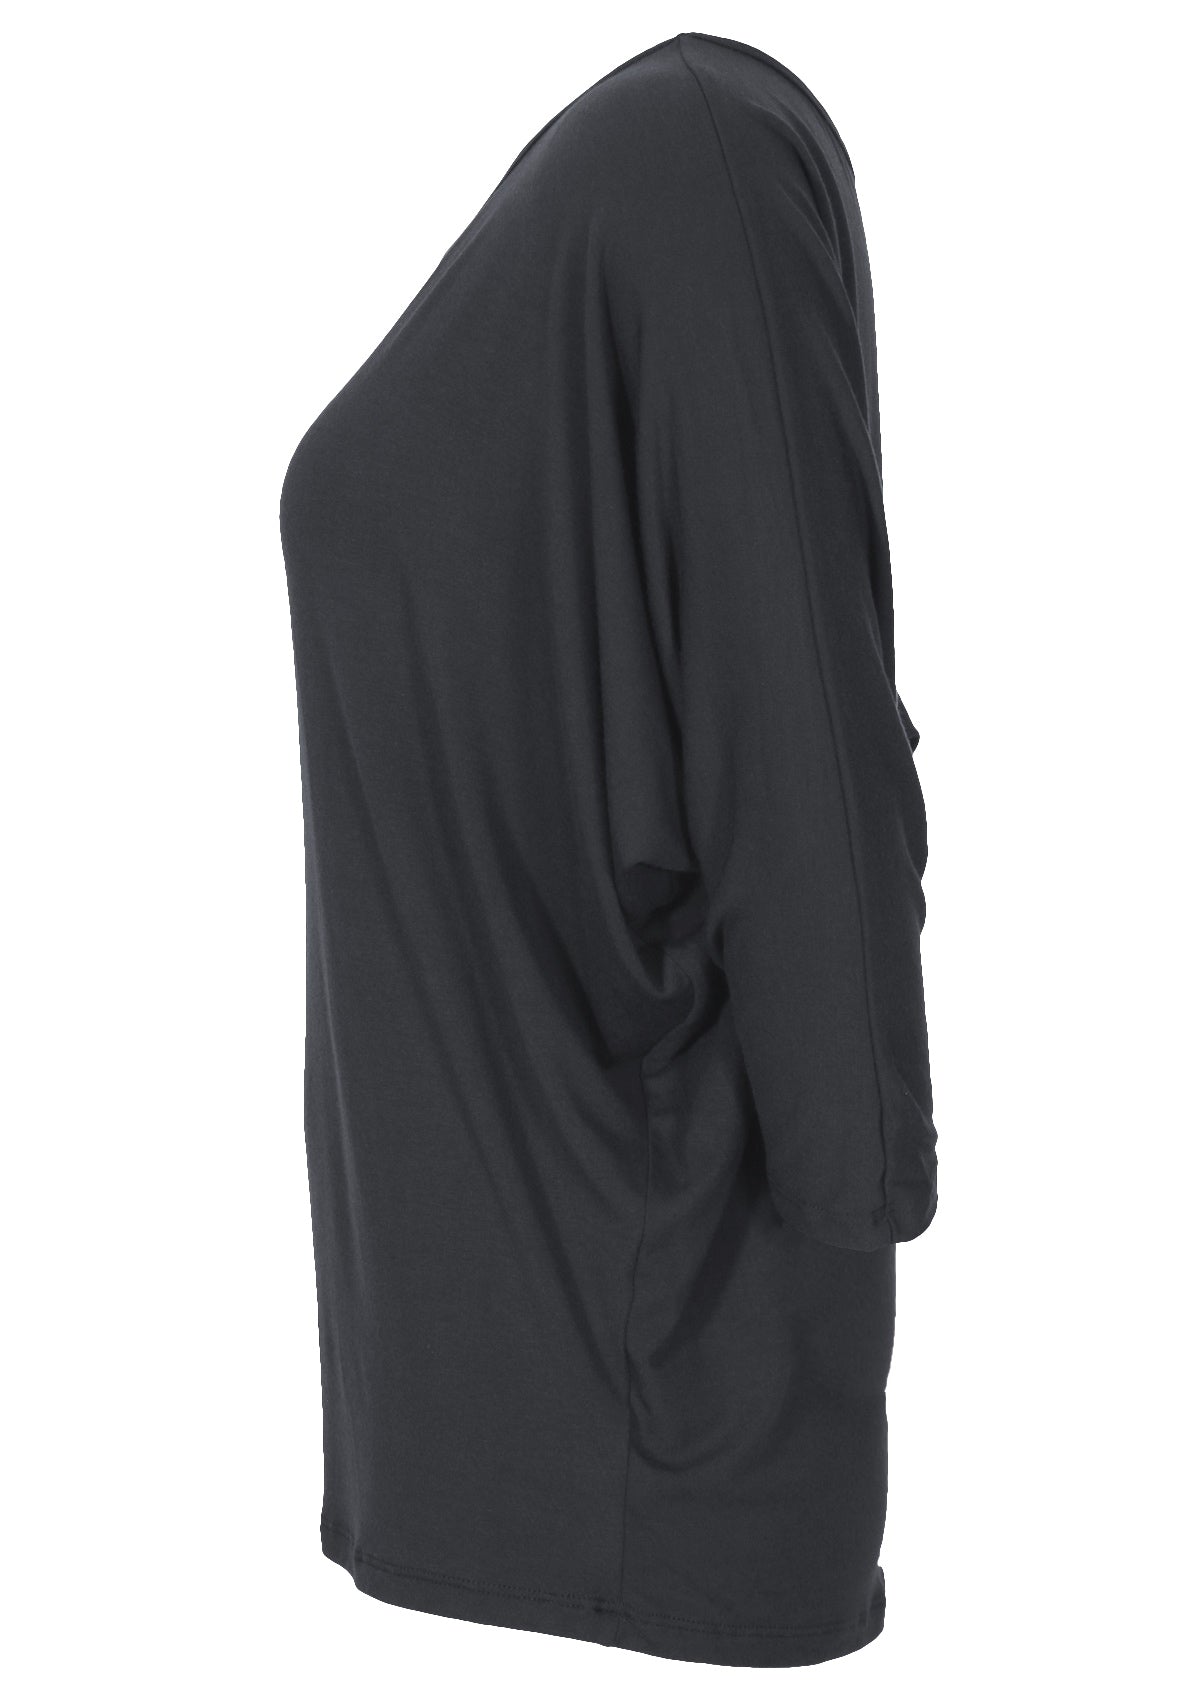 Side view of a 3/4 sleeve rayon batwing round neckline dark grey top.